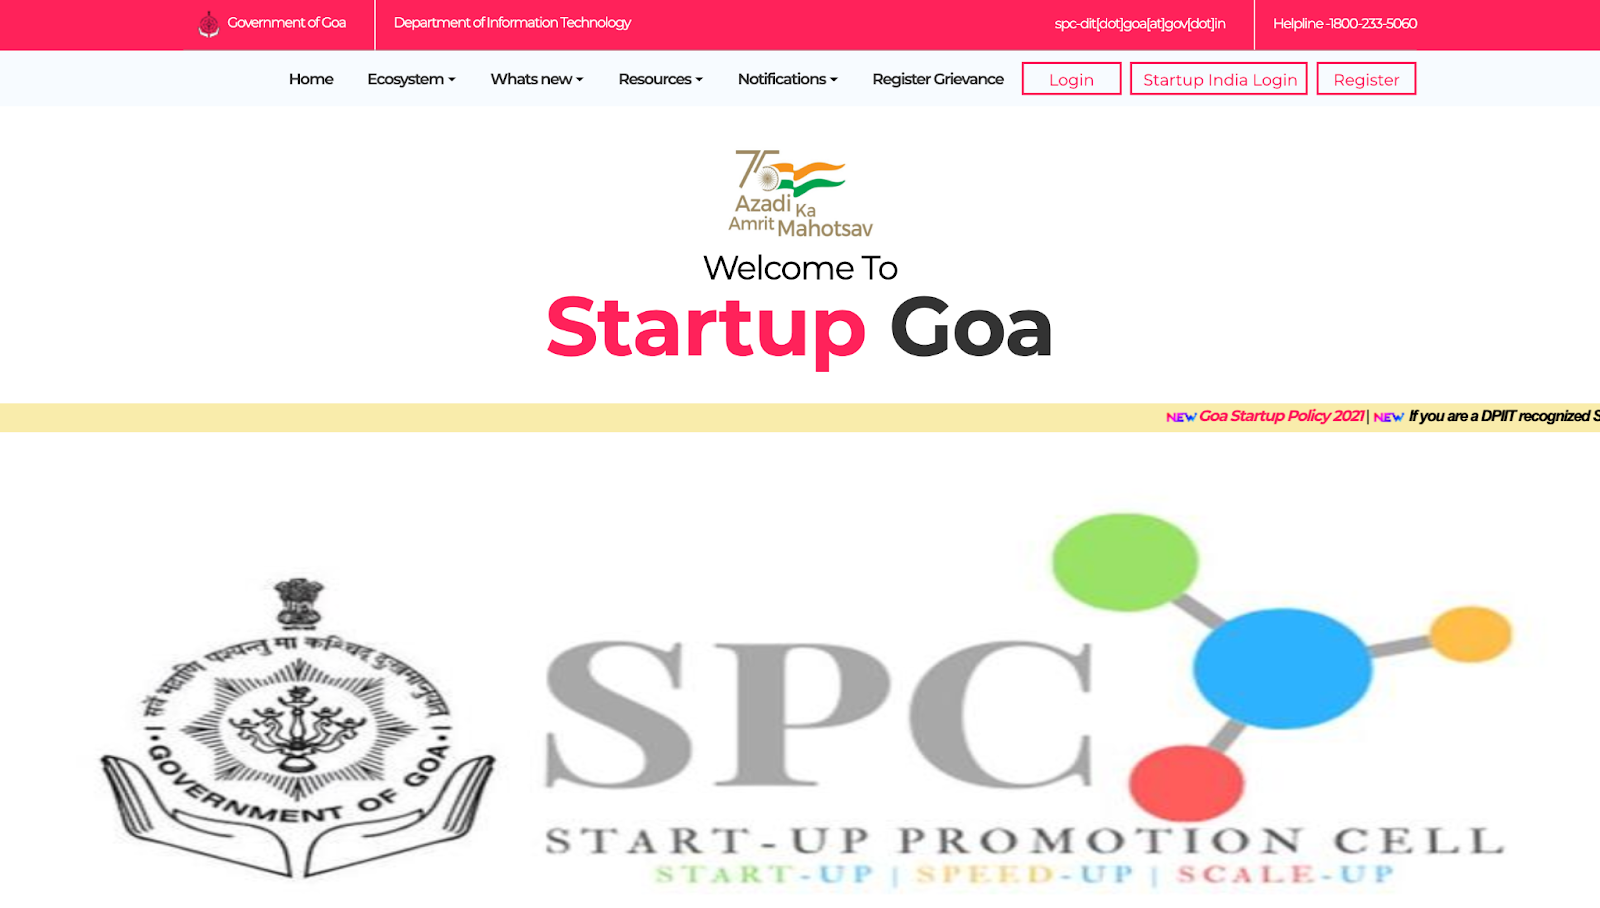 Top 4 schemes/programs offered by Startup Goa for entrepreneurs